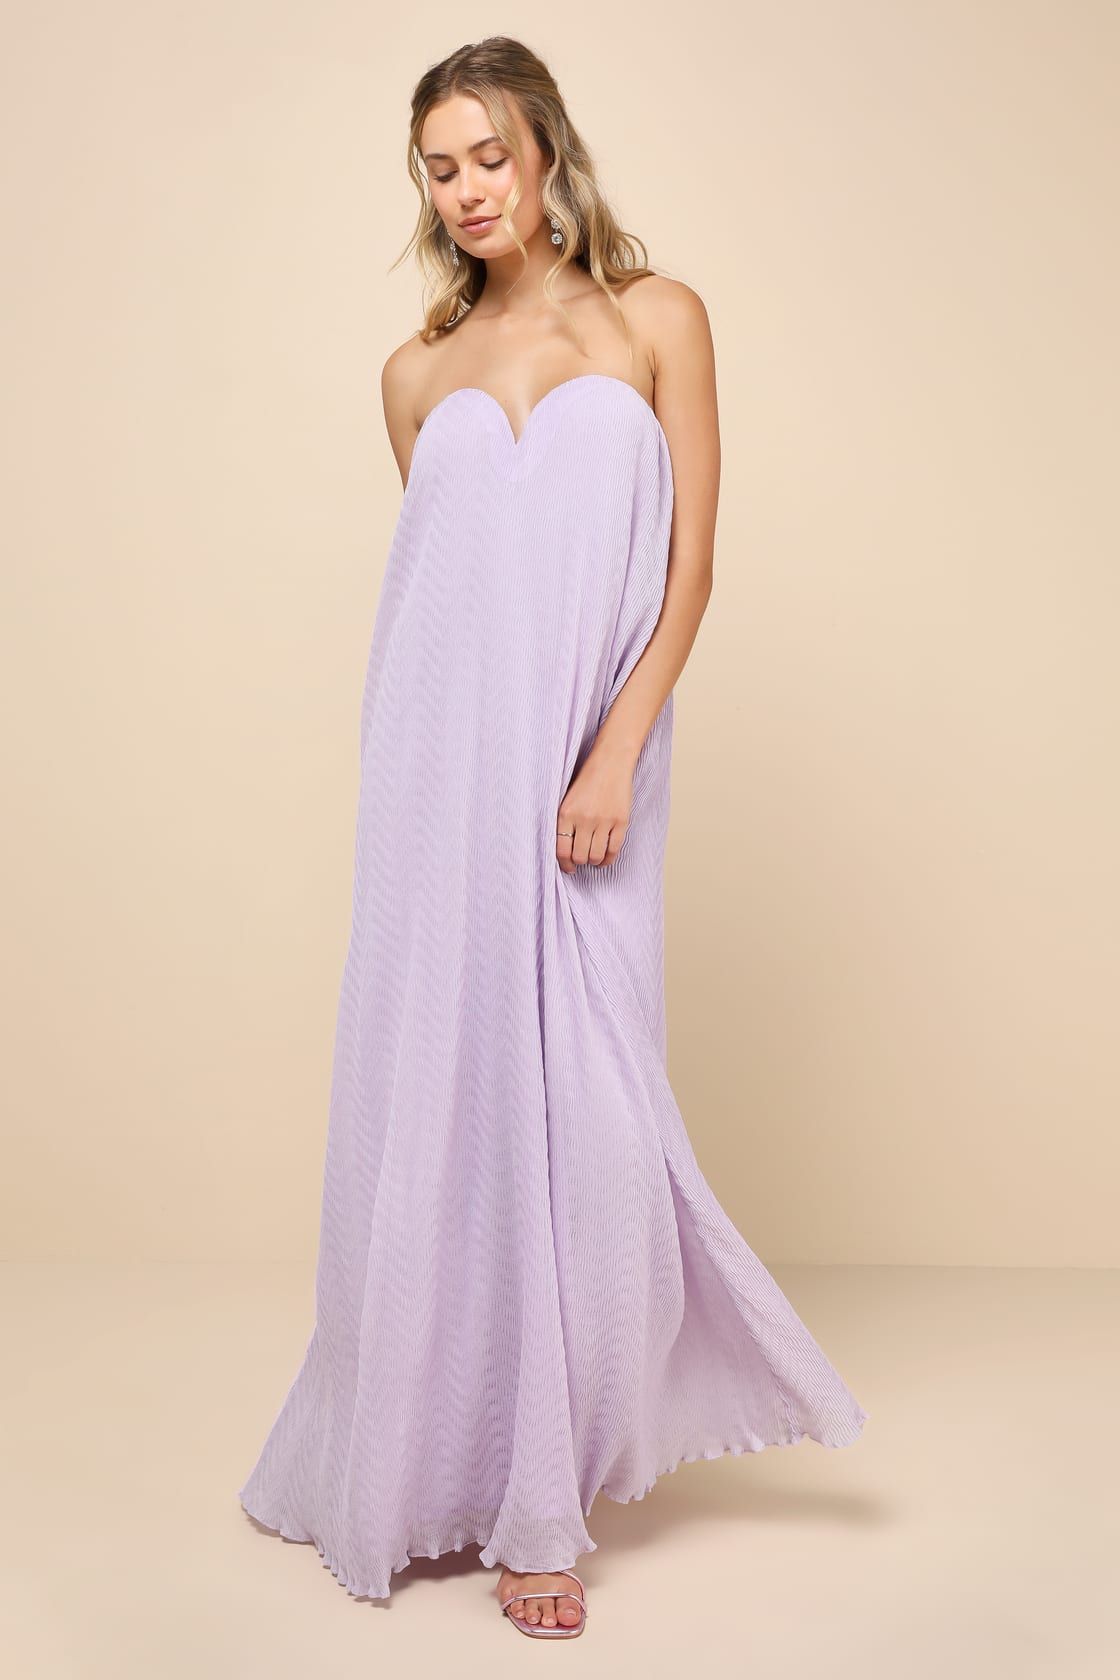 Perfect Always Lavender Textured Strapless Swing Maxi Dress | Lulus